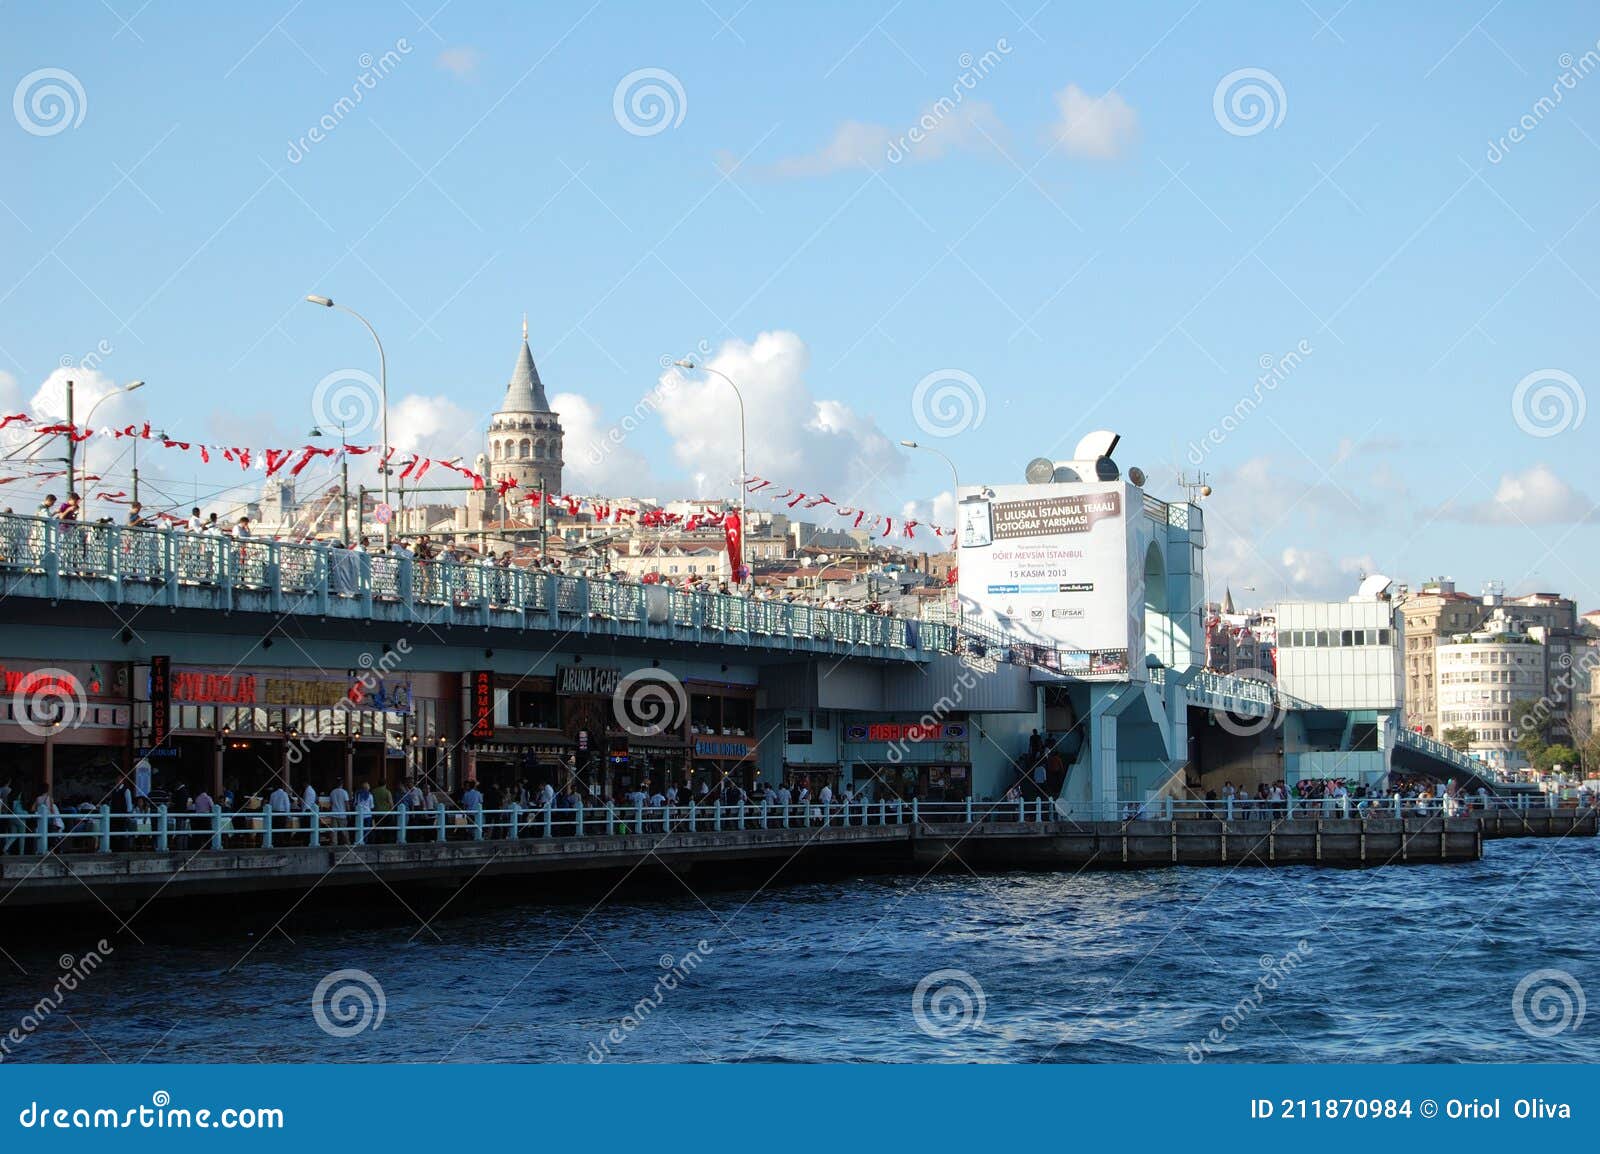 view of the main places and monuments of istanbul (turkey). galata bridge